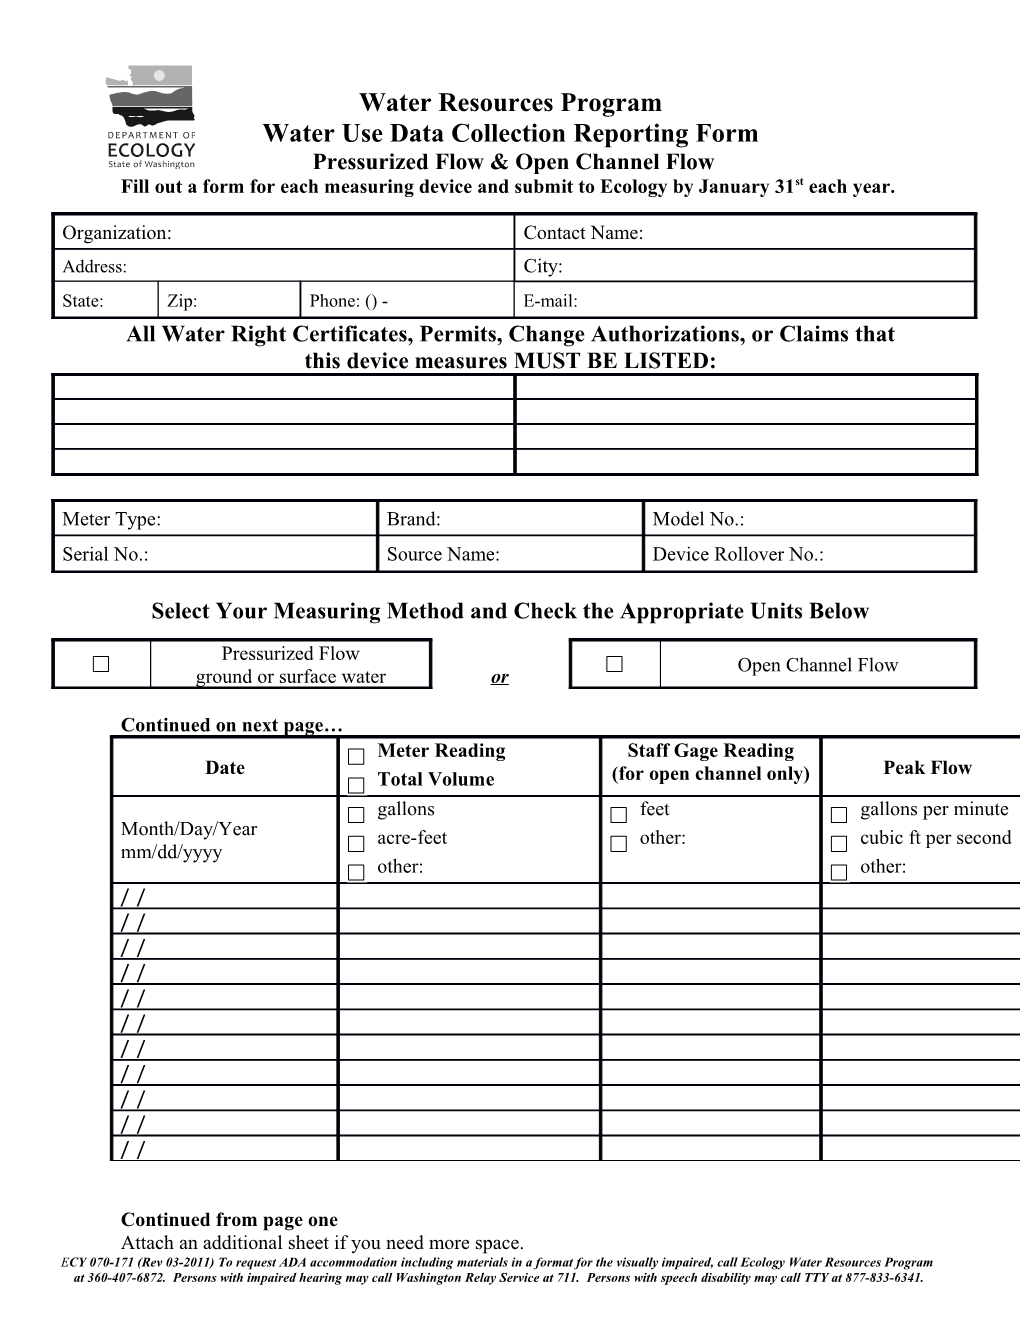 Water Use Data Collection Reporting Form